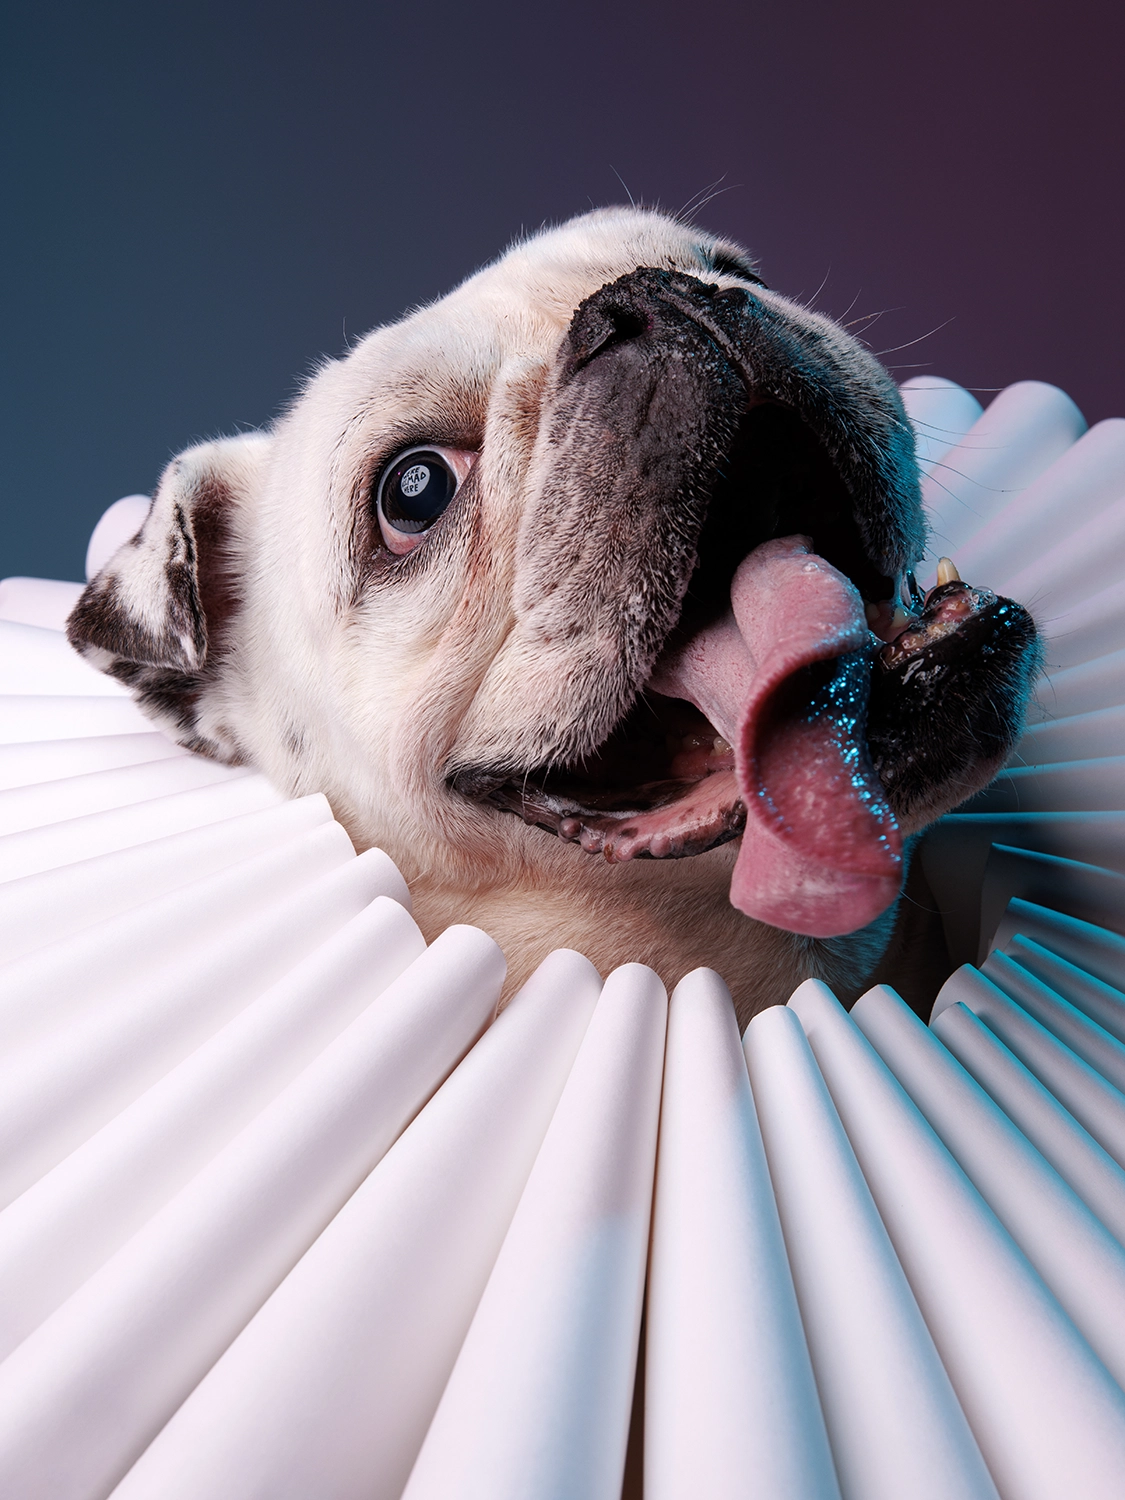 Photo portrait of a white English Bulldog wearing a massive Elizabethan style ruff collar against a multi colored background. The reflection in the eyes read "WE'RE ALL MAD HERE" a quote by Lewis Caroll